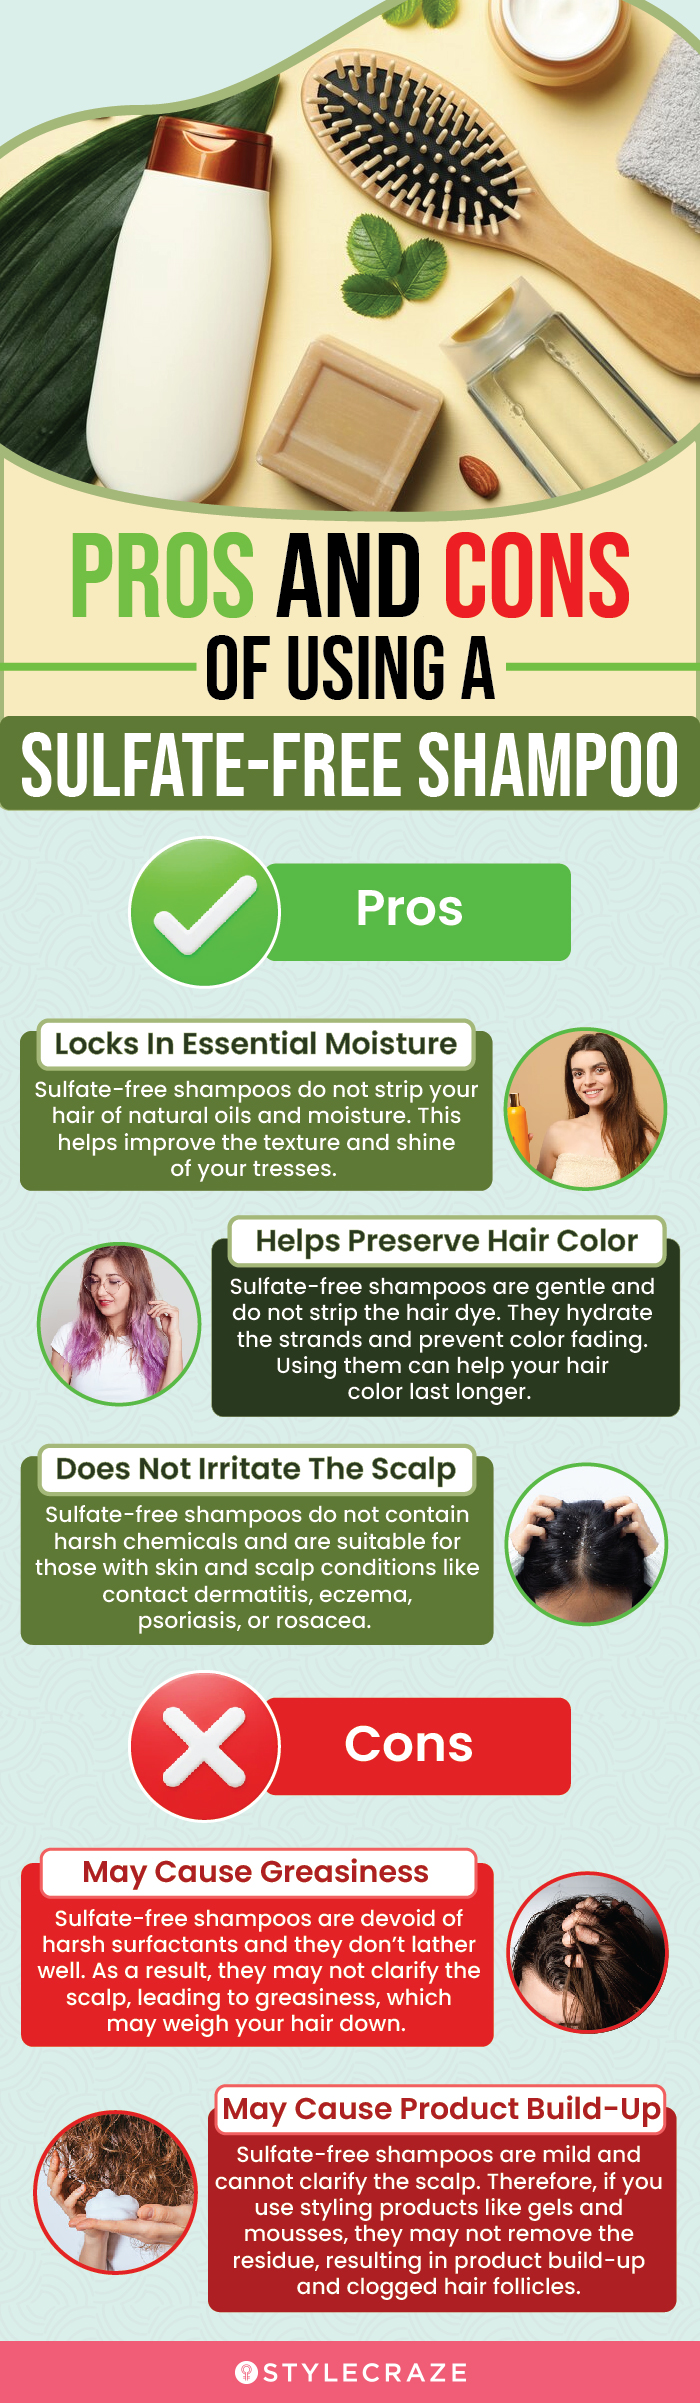 pros and cons of using a sulfate-free shampoo (infographic)